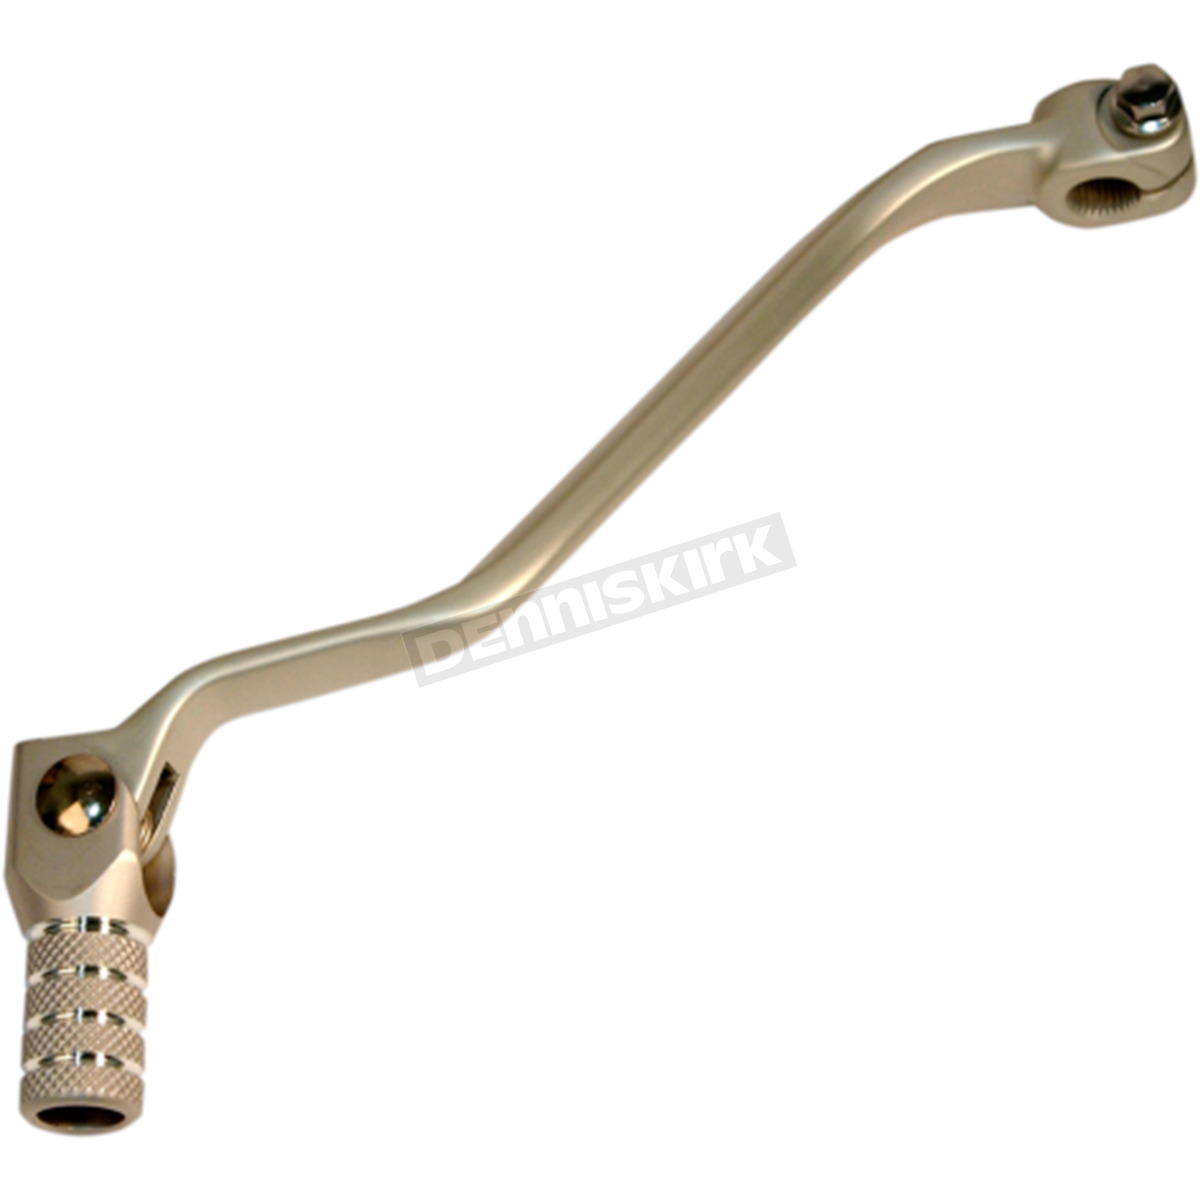 1996-2002 SUZUKI DR650 STEEL EMGO FORGED SHIFT LEVER FOR SUZUKI Manufacturer Part Number: 83-88087-AD Manufacturer: EMGO Actual parts may vary. Stock Photo 